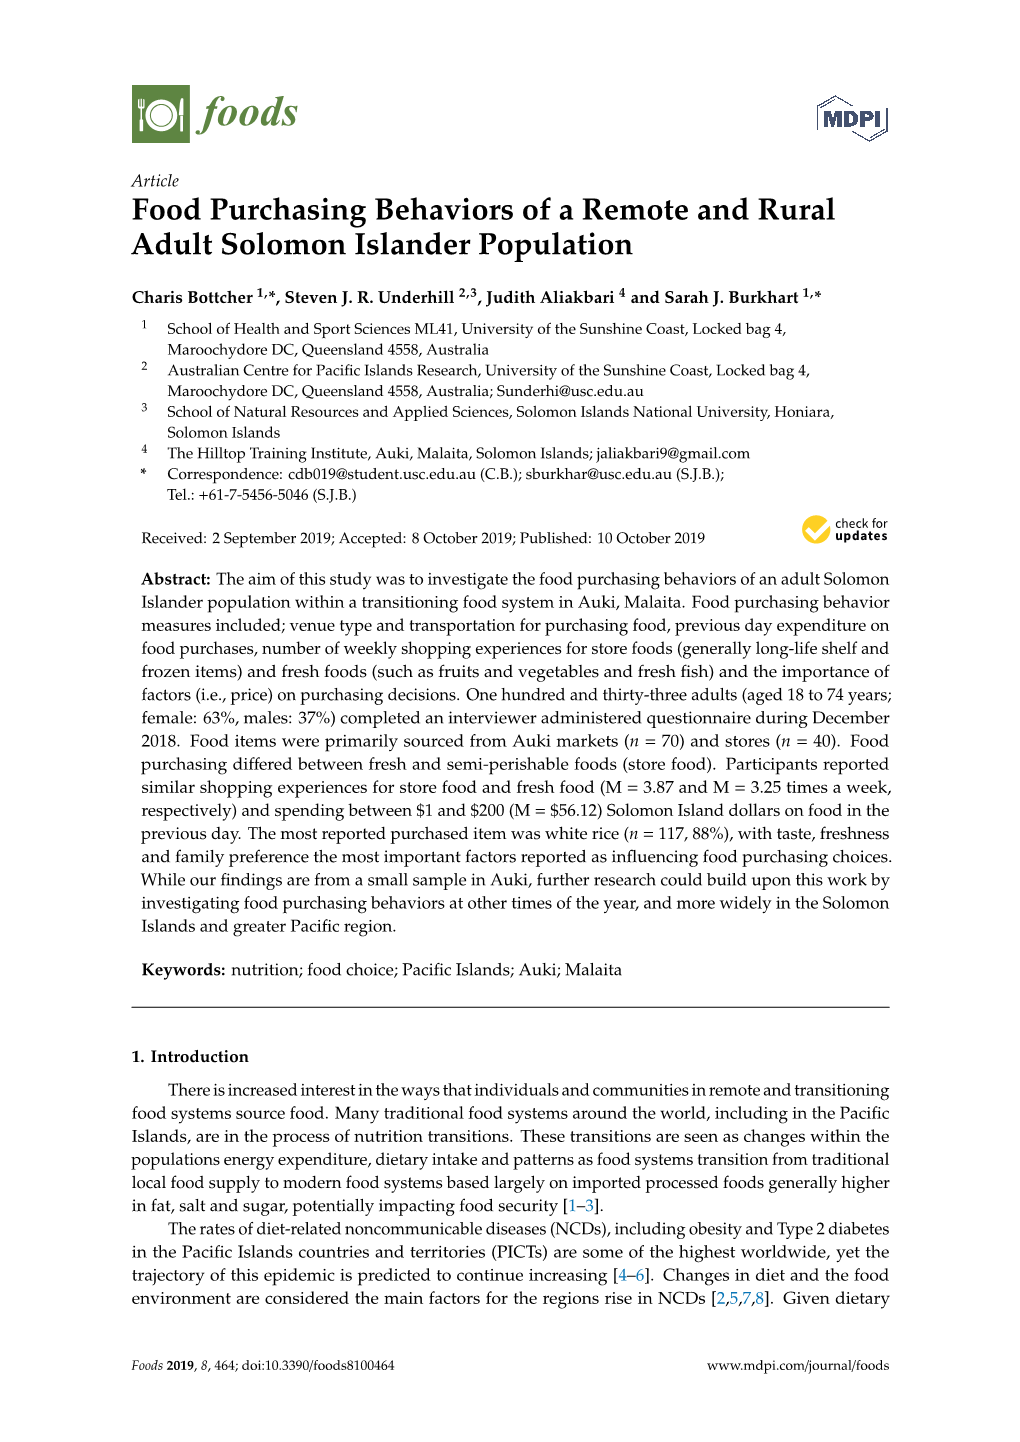 Food Purchasing Behaviors of a Remote and Rural Adult Solomon Islander Population